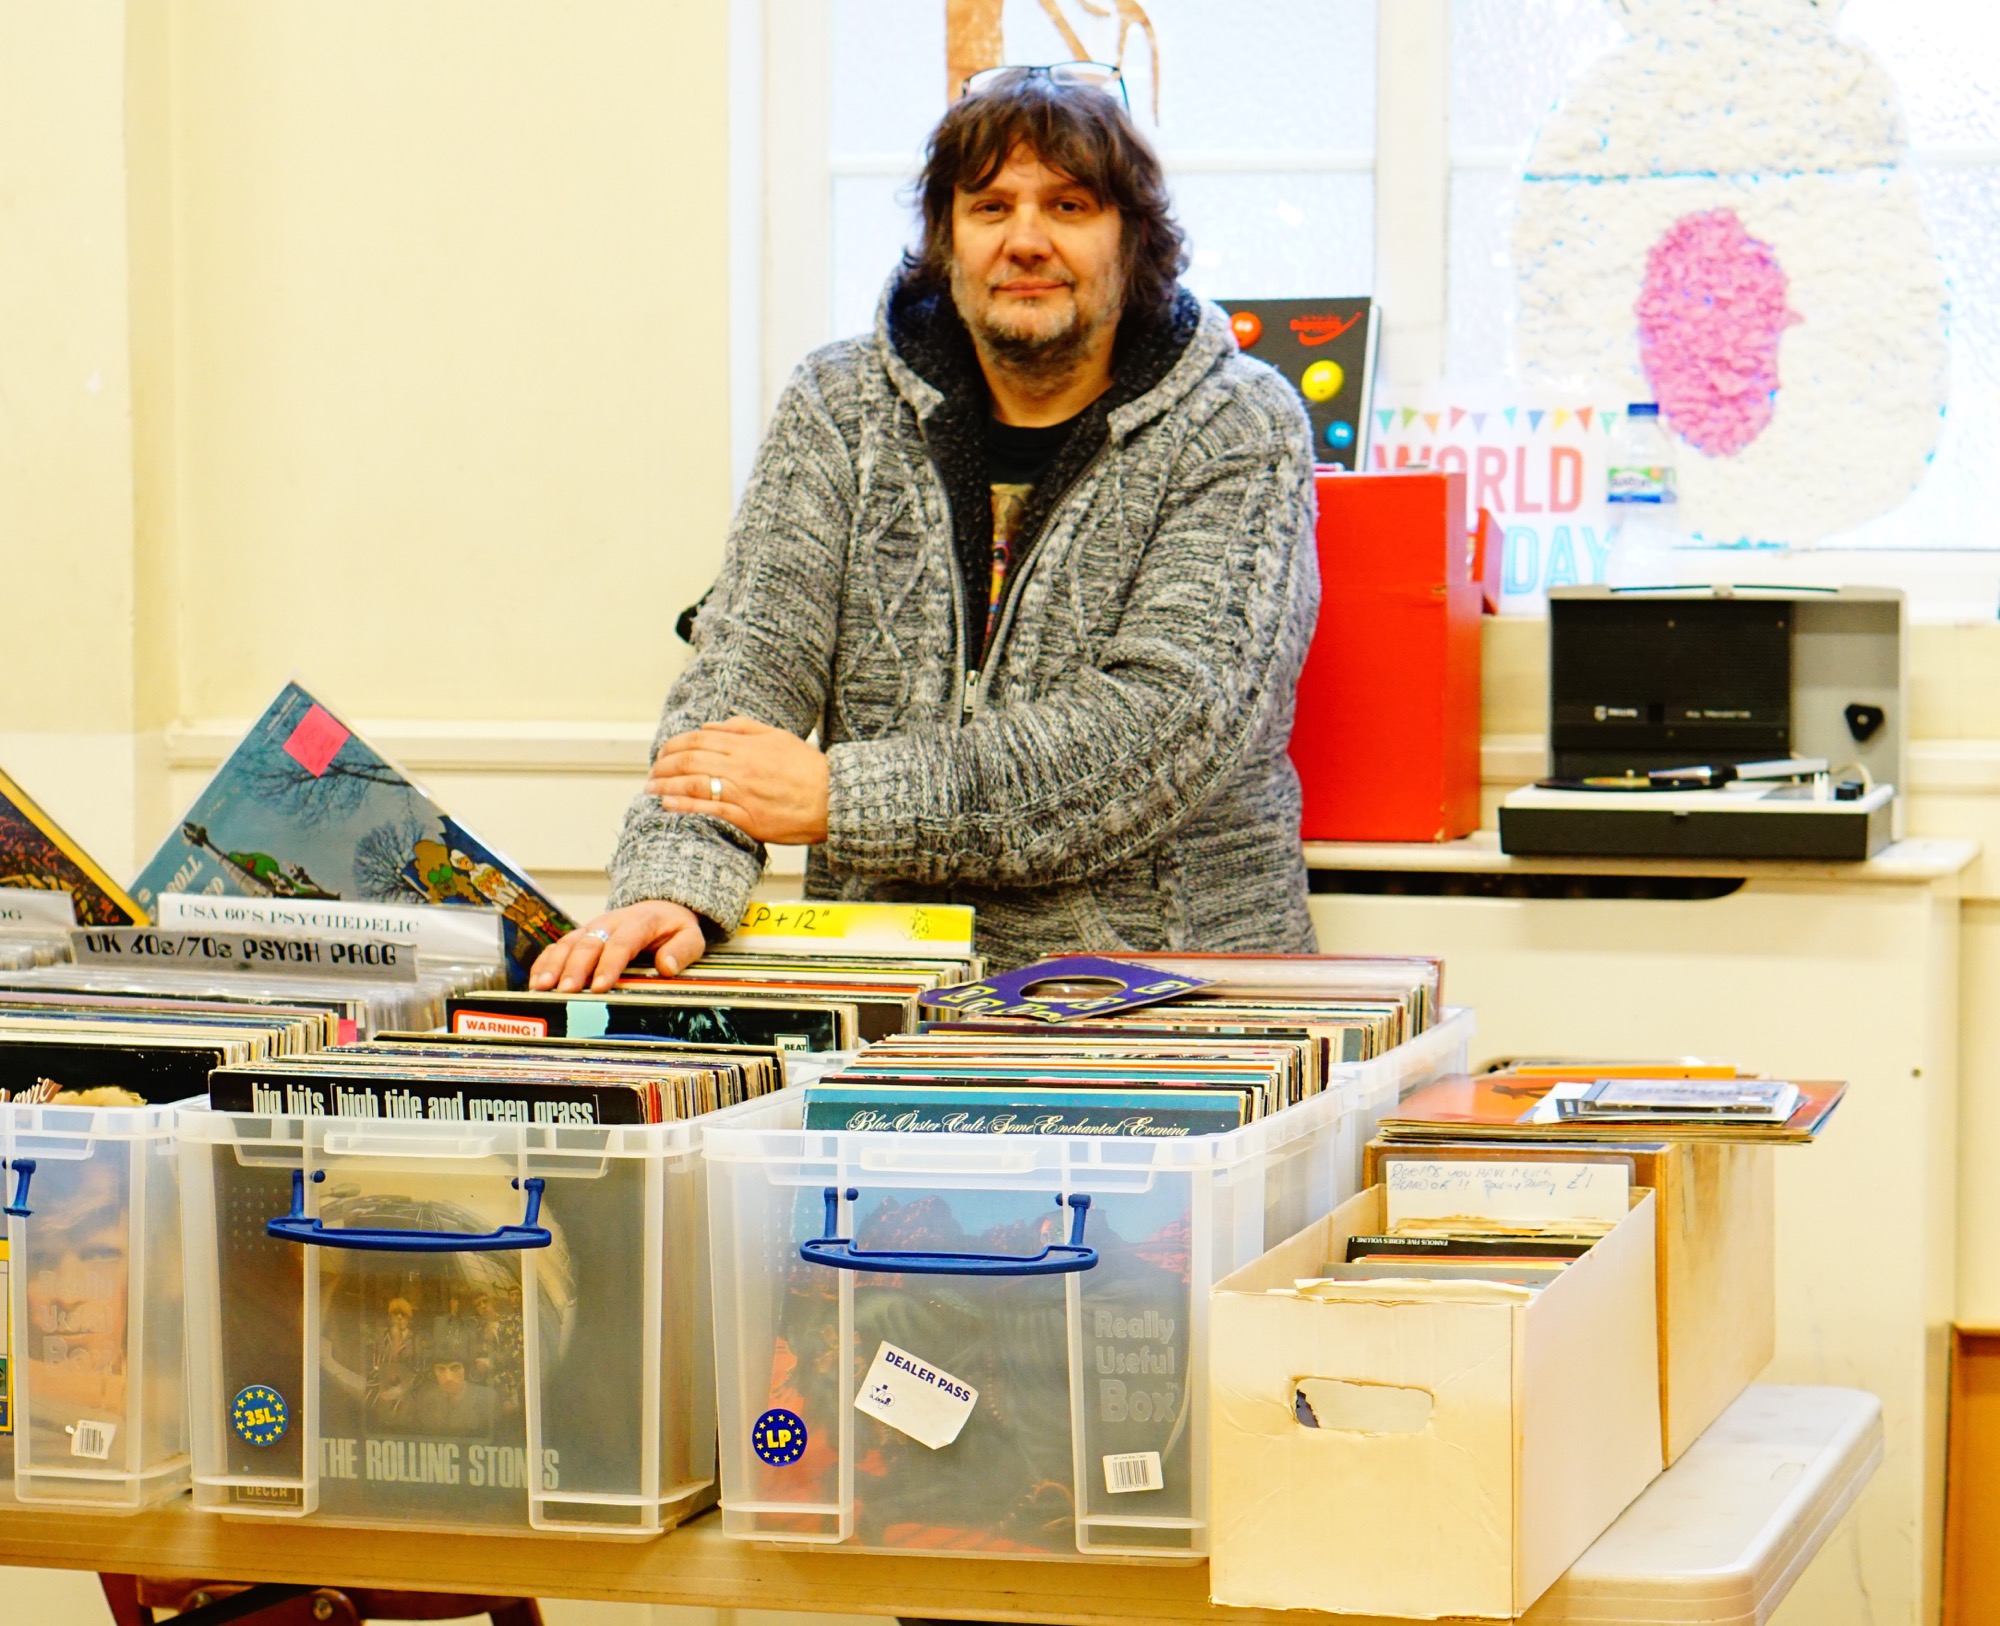 Pete ready to buy and sell records at the record fair